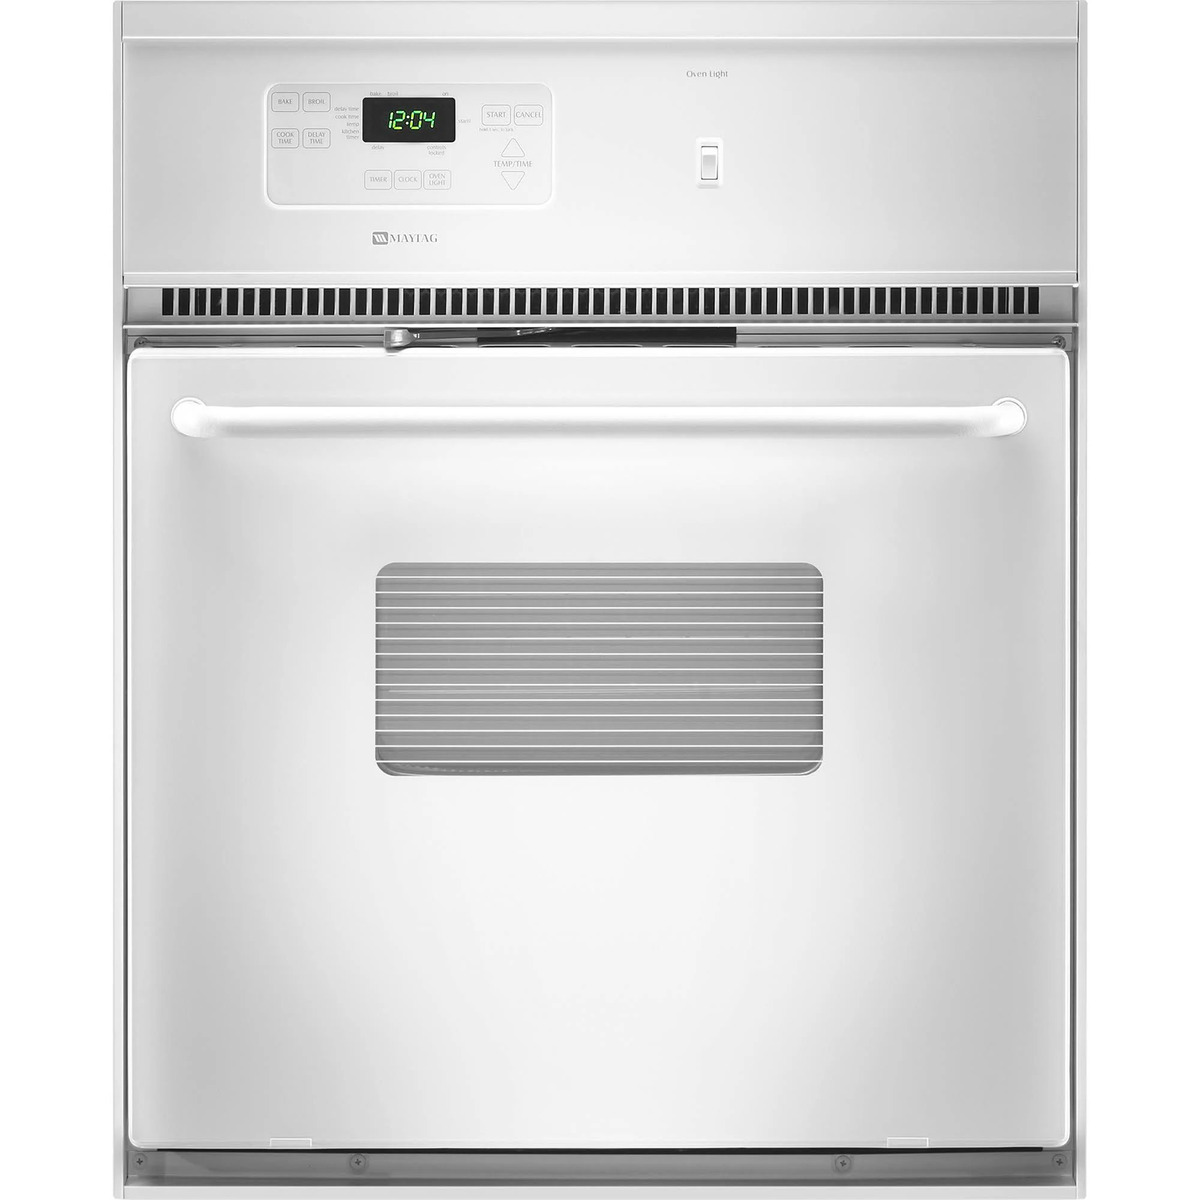 How To Fix The Error Code F1-E1 For Maytag Oven